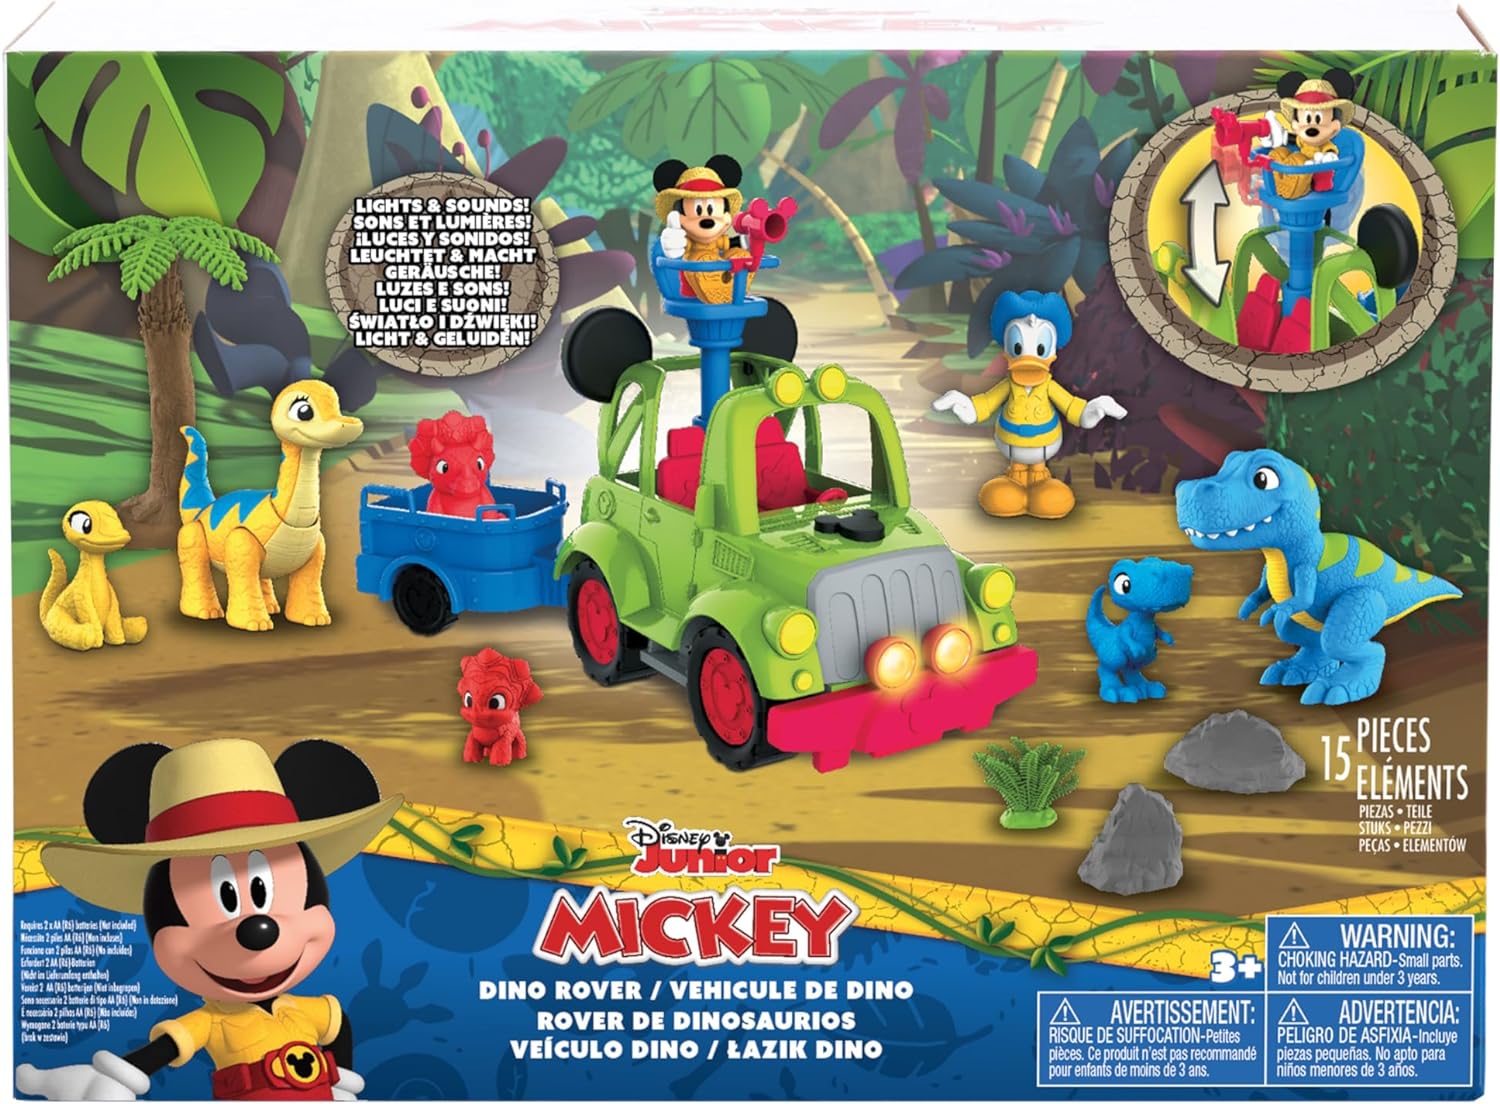 MICKEY Disney Junior Mouse Funhouse Dino Safari Rover 16-Piece Play Figures and Vehicle Playset, Officially Licensed Kids Toys for Ages 3 Up, Amazon Exclusive,Blue